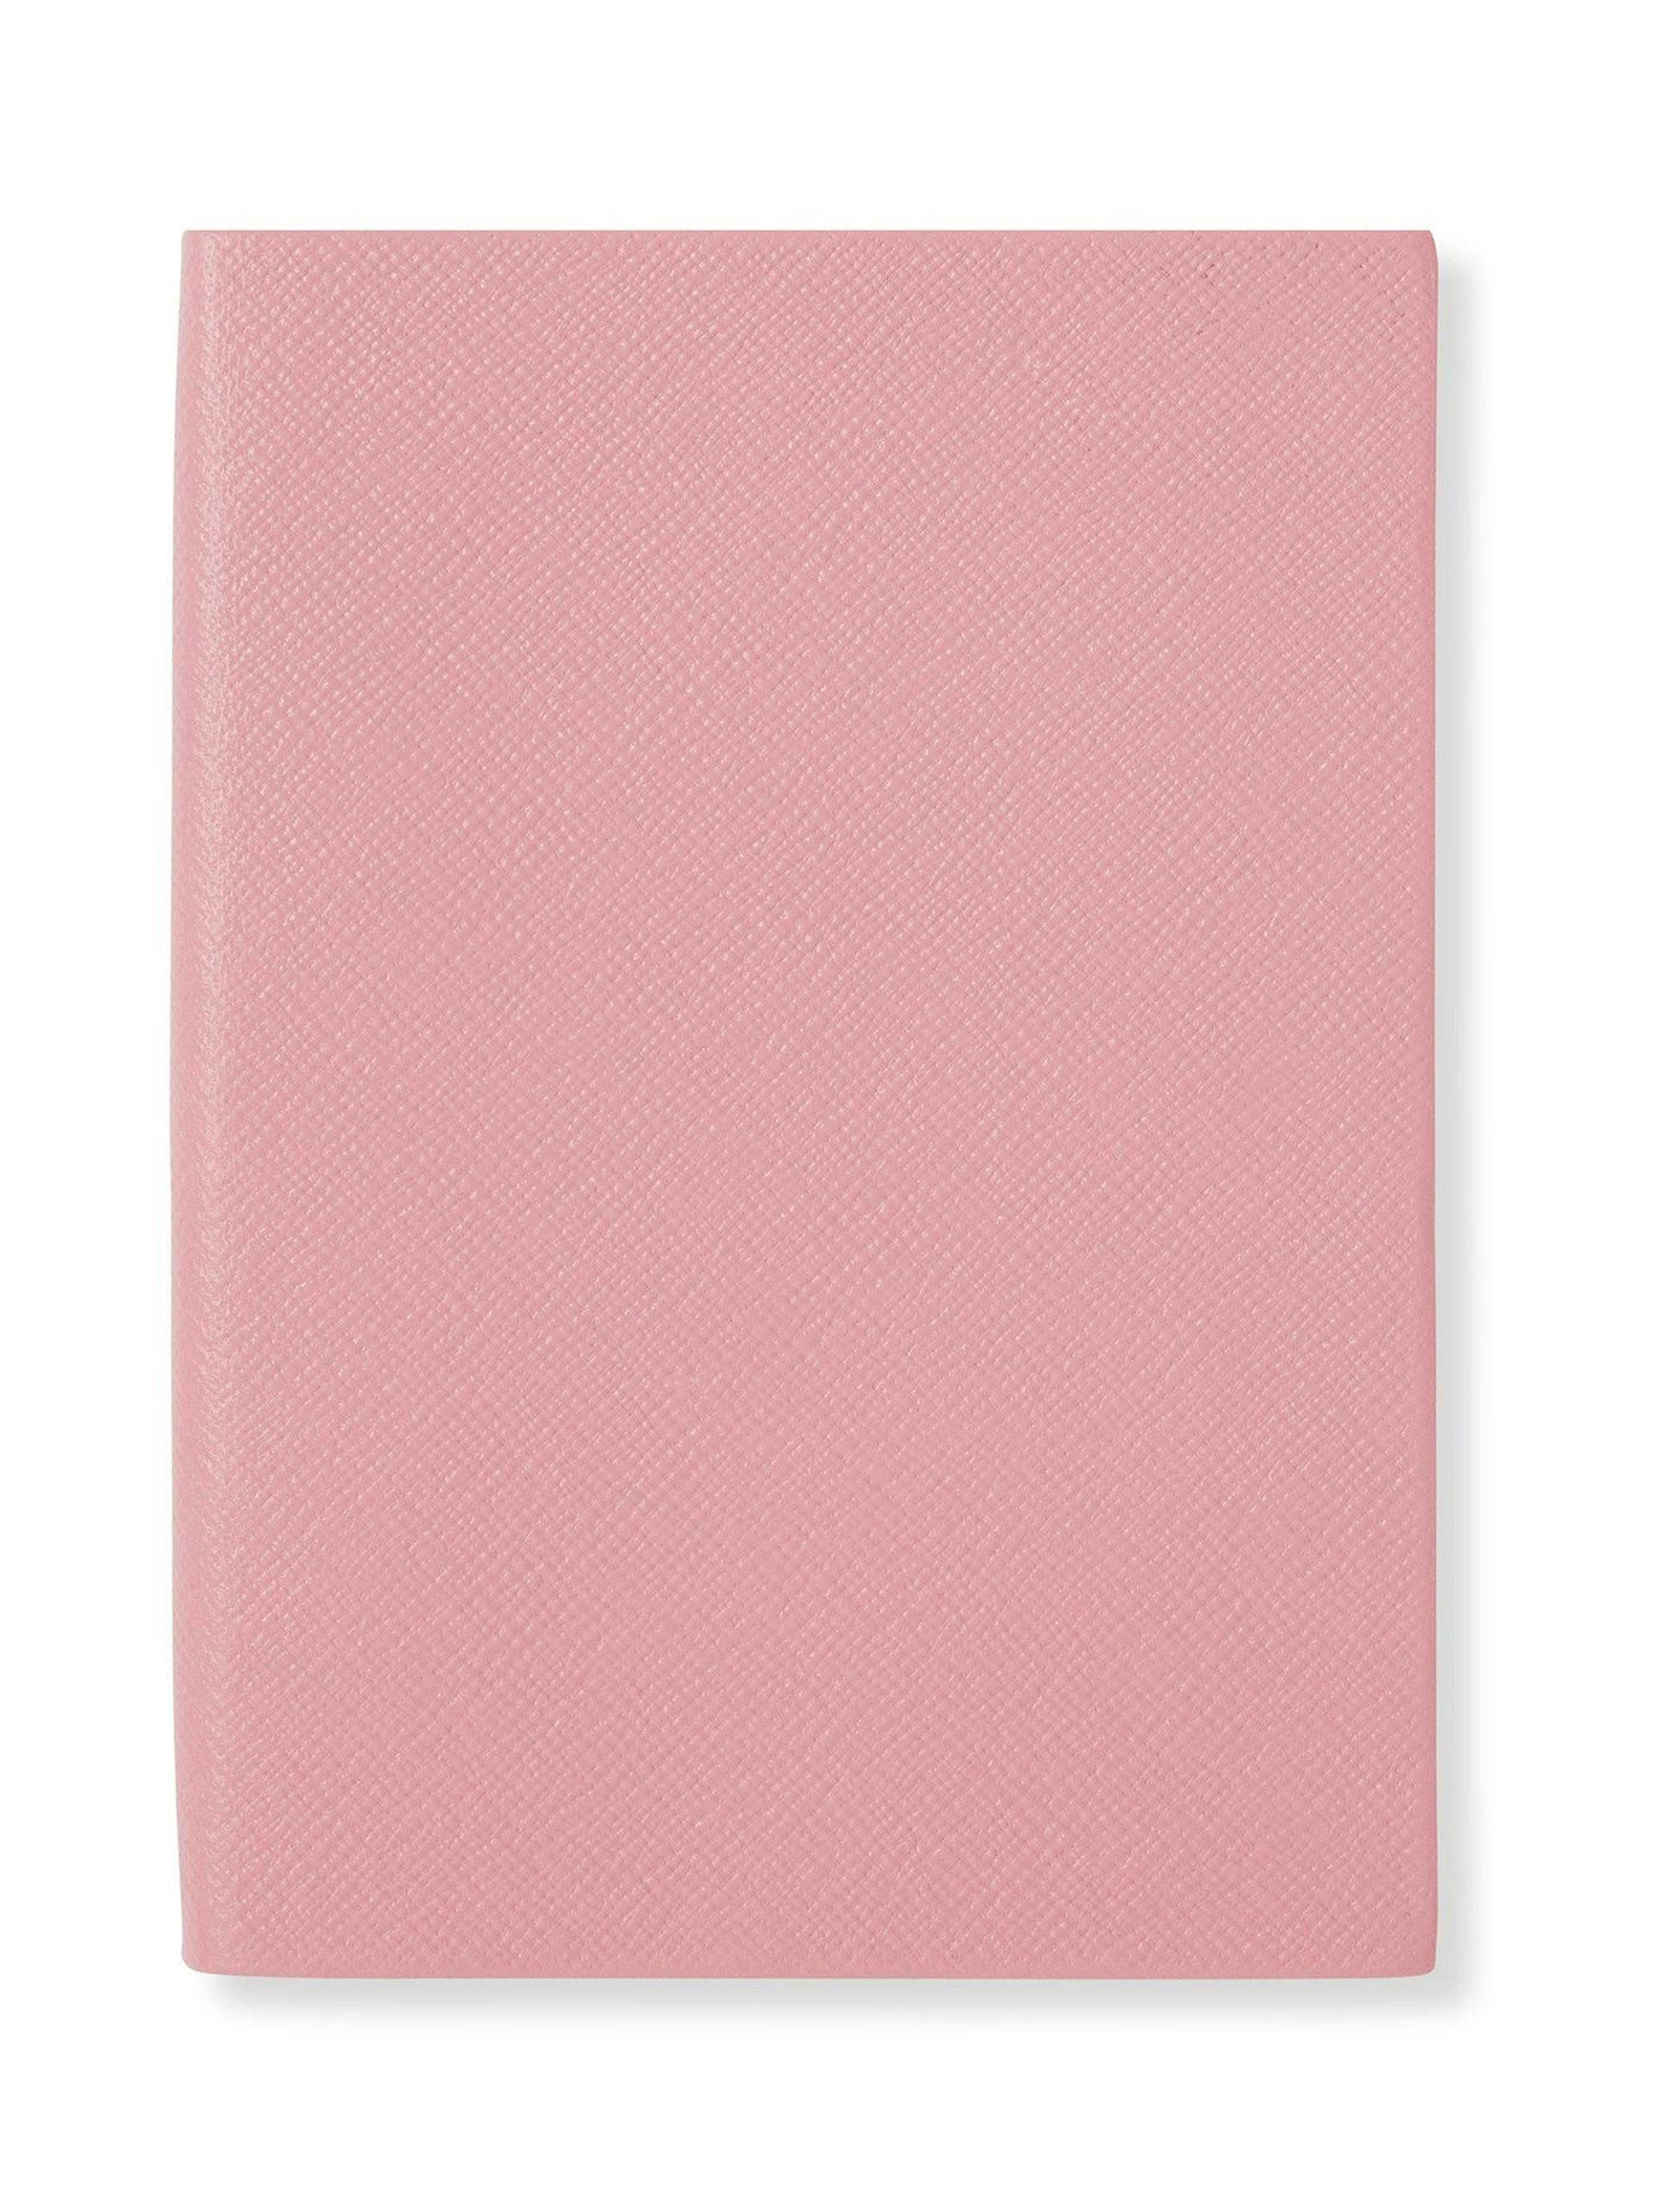 Candy pink notebook